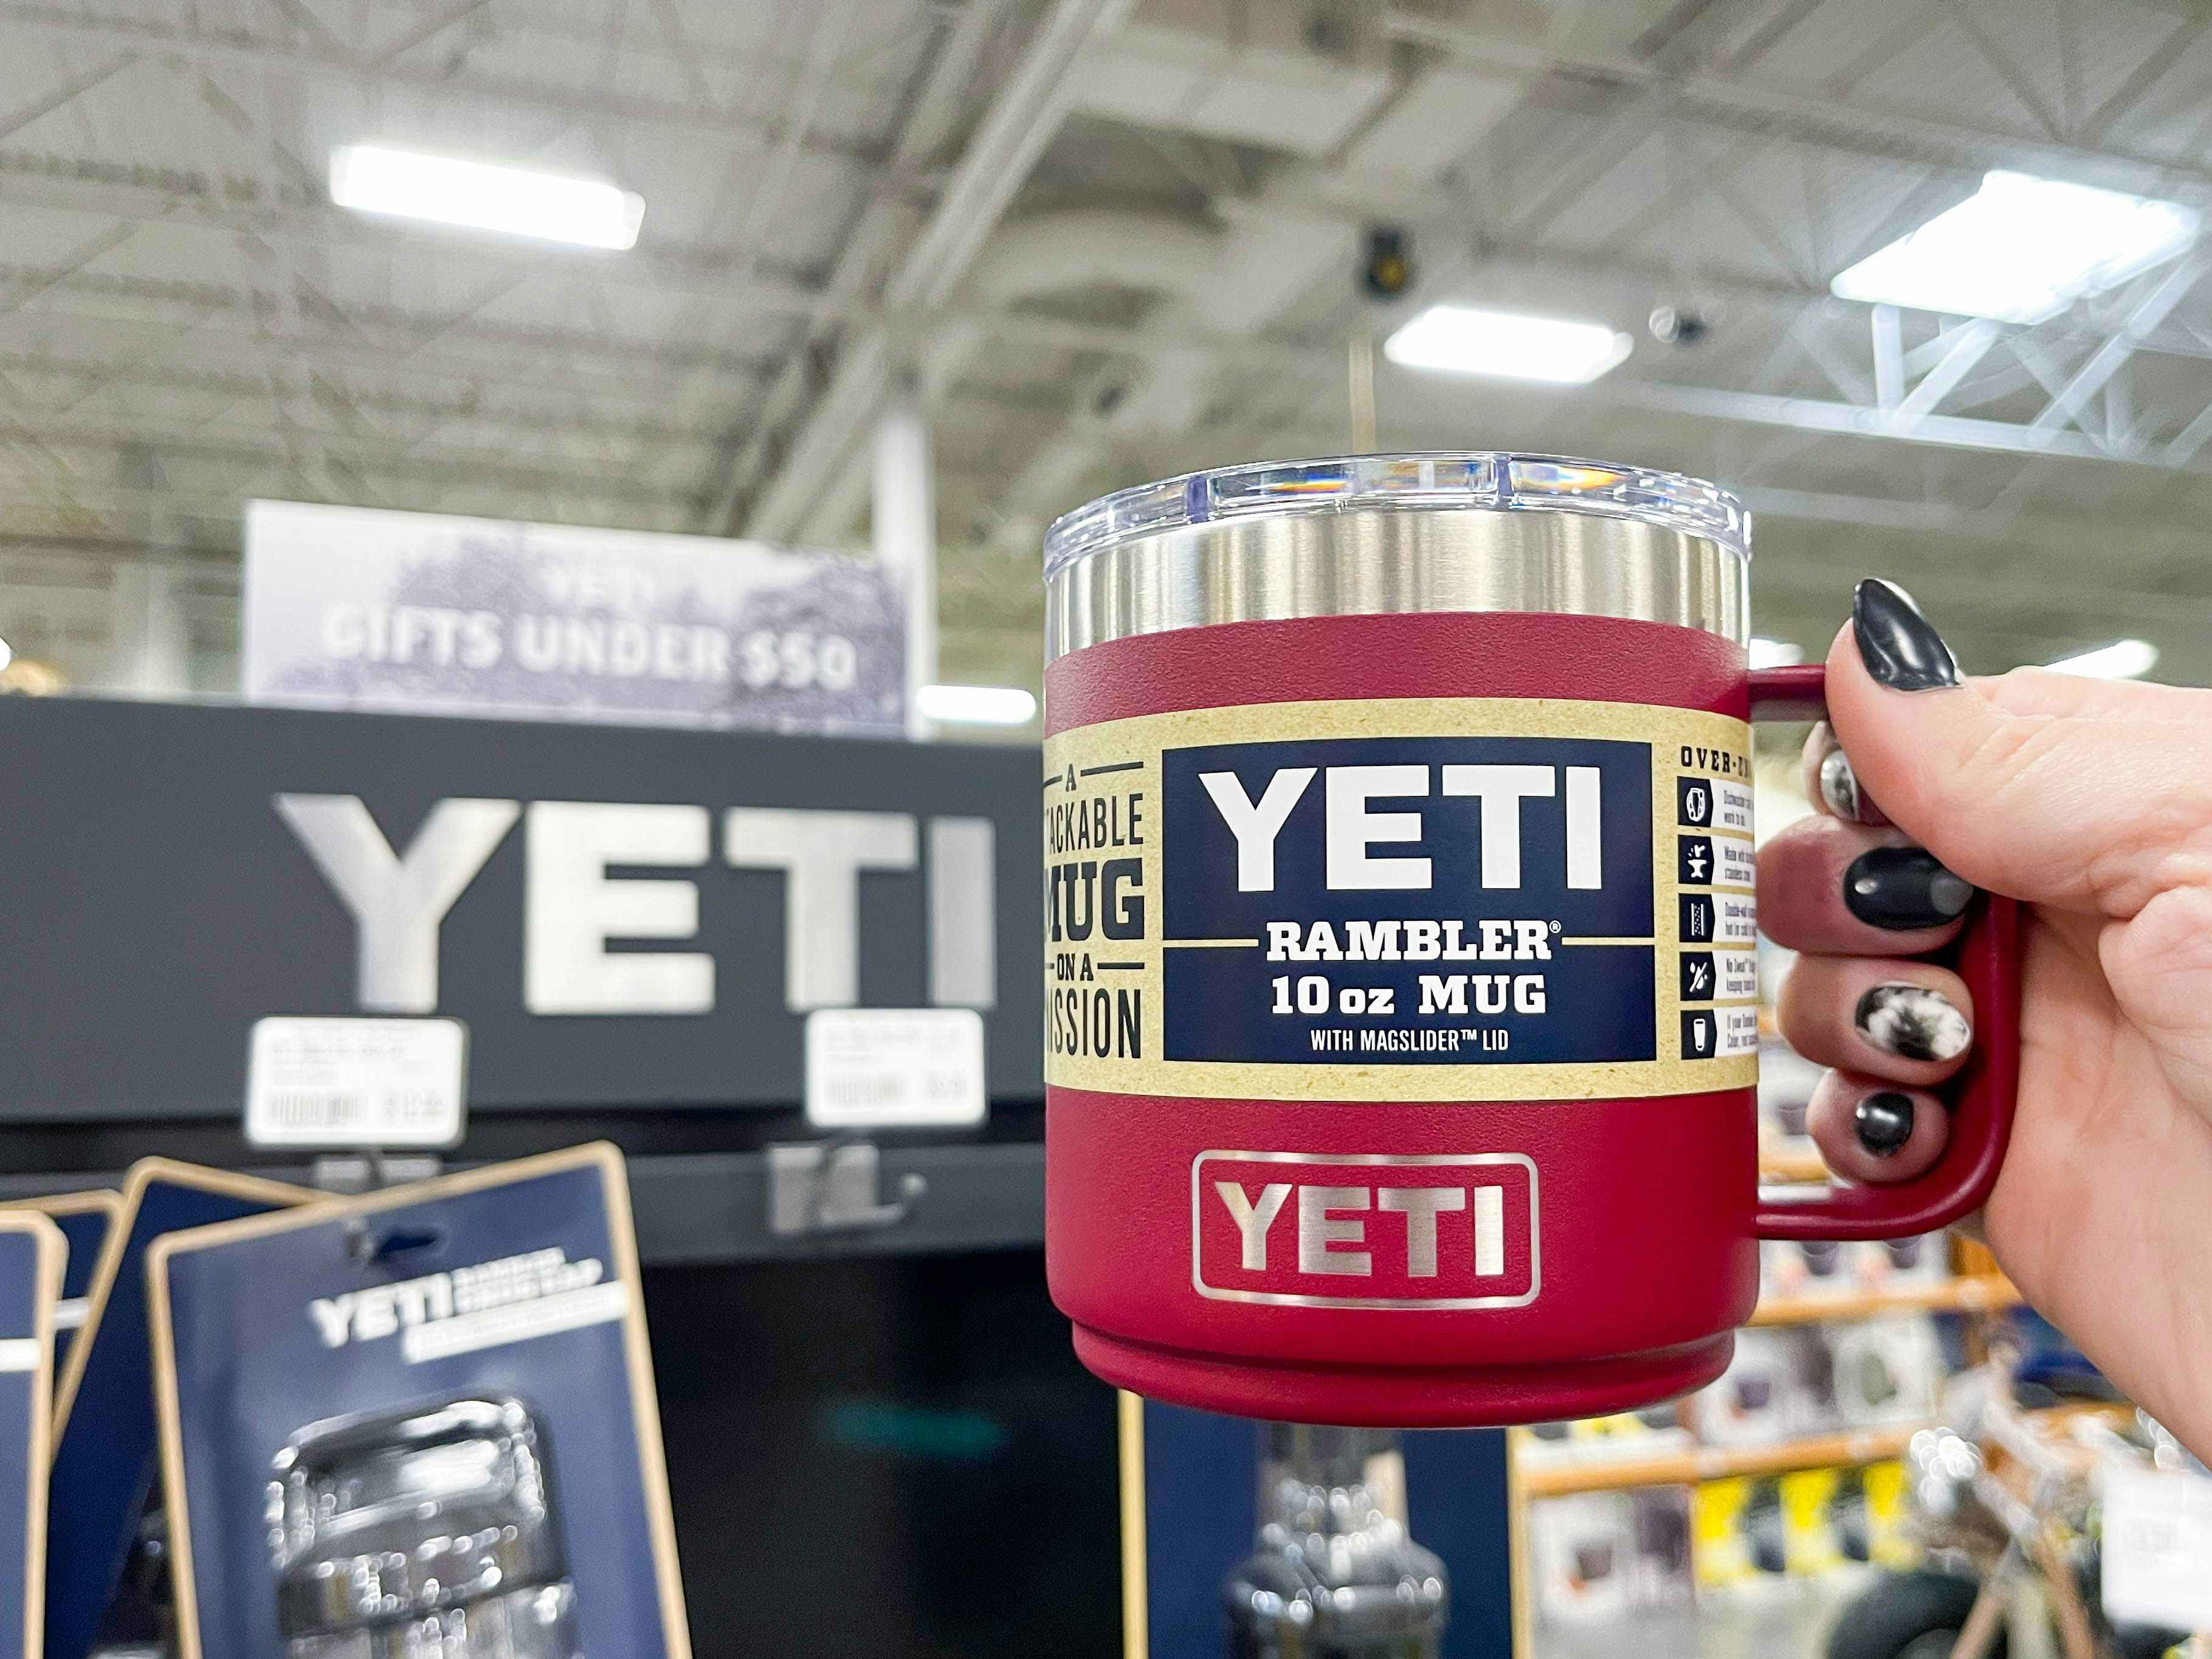 A person's hand holding a Yeti Rambler mug next to a Yeti display inside a store.